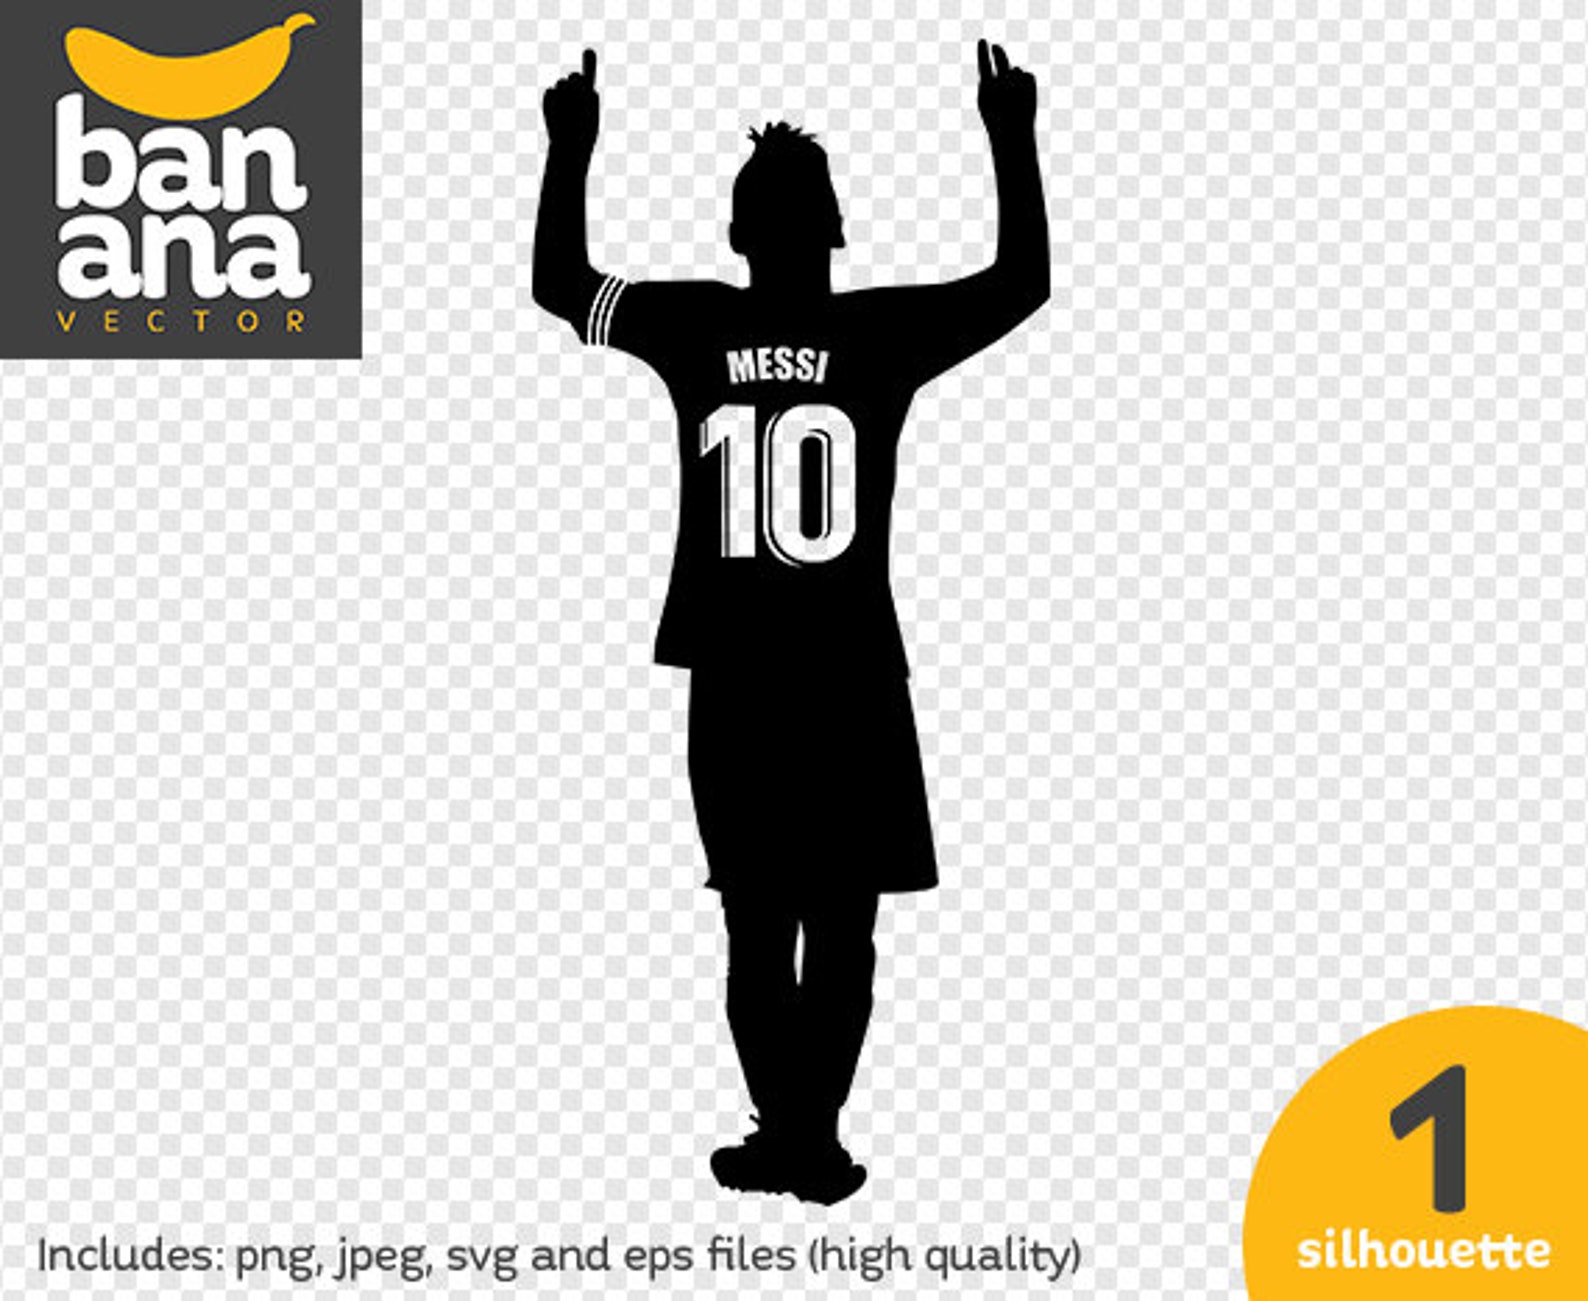 SALE Lionel Messi Silhouette png jpg svg eps files high | Etsy